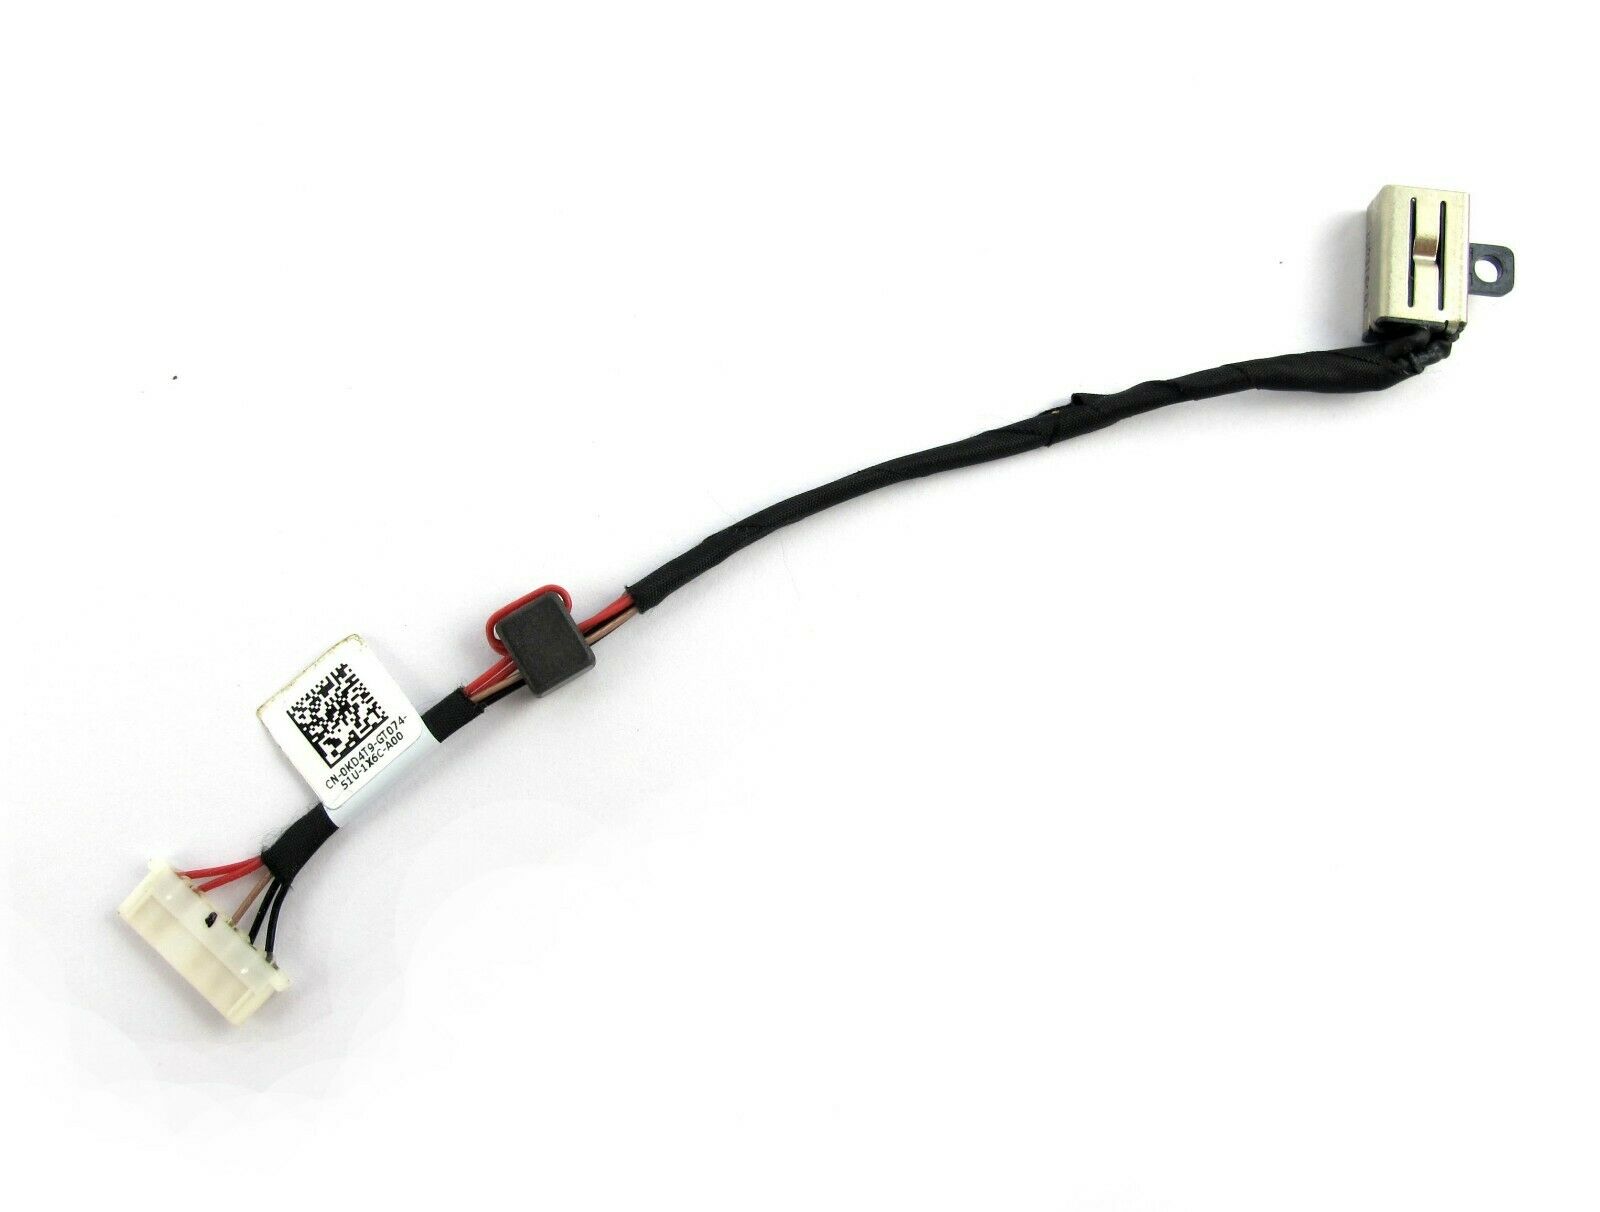 New DC Power Jack Cable for Dell Inspiron Vostro 3551 3552 3558 3559 0KD4T9 Compa - Click Image to Close